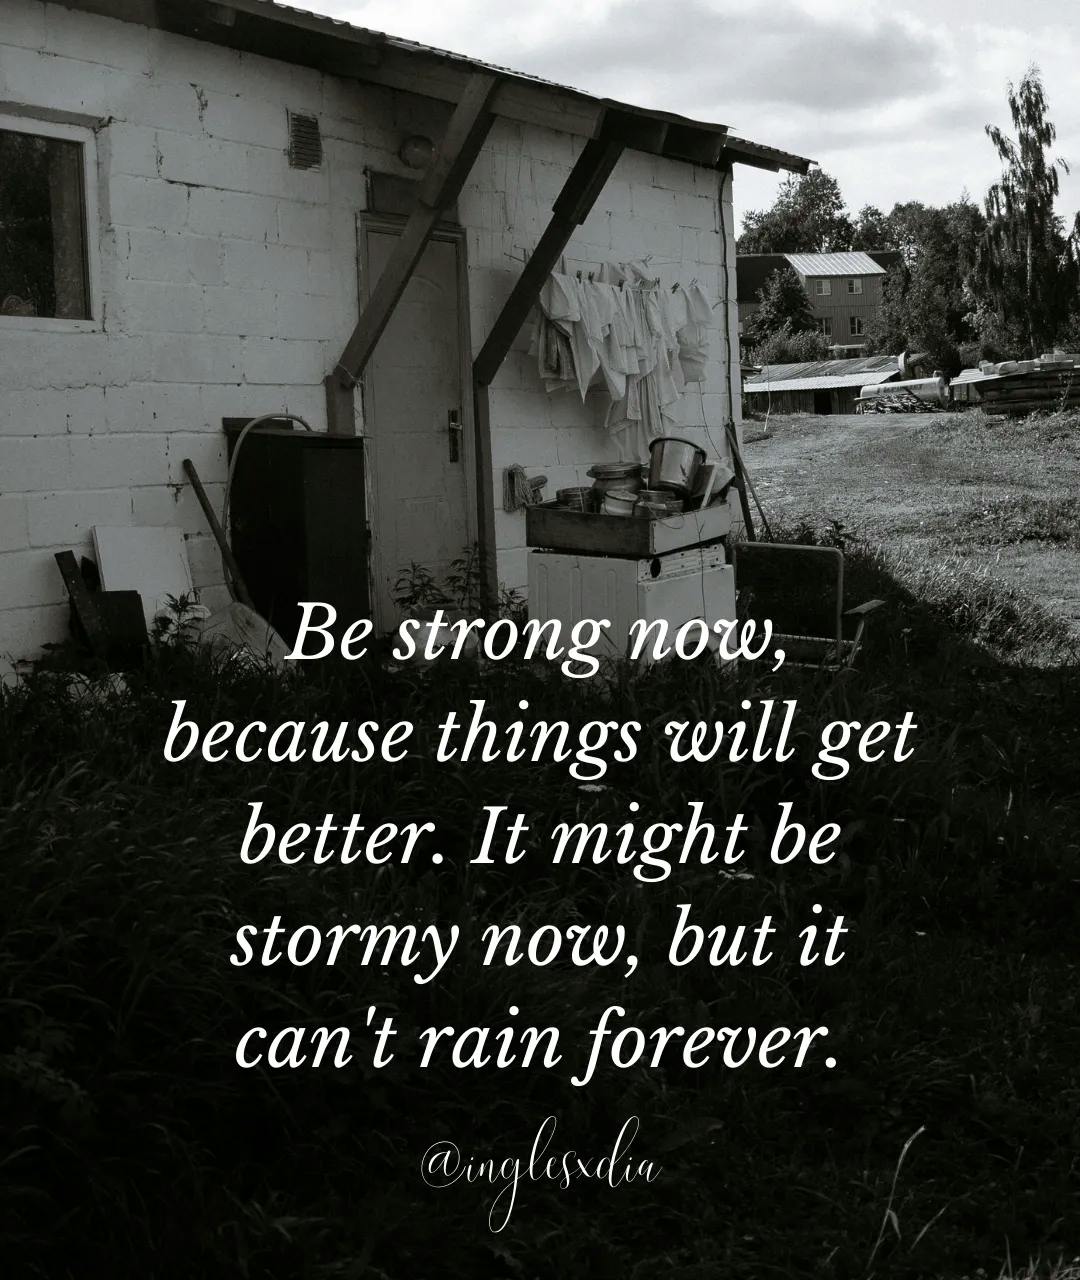 Frases motivadoras en inglés: Be strong now, because things will get better. It might be stormy now, but it can't rain forever.